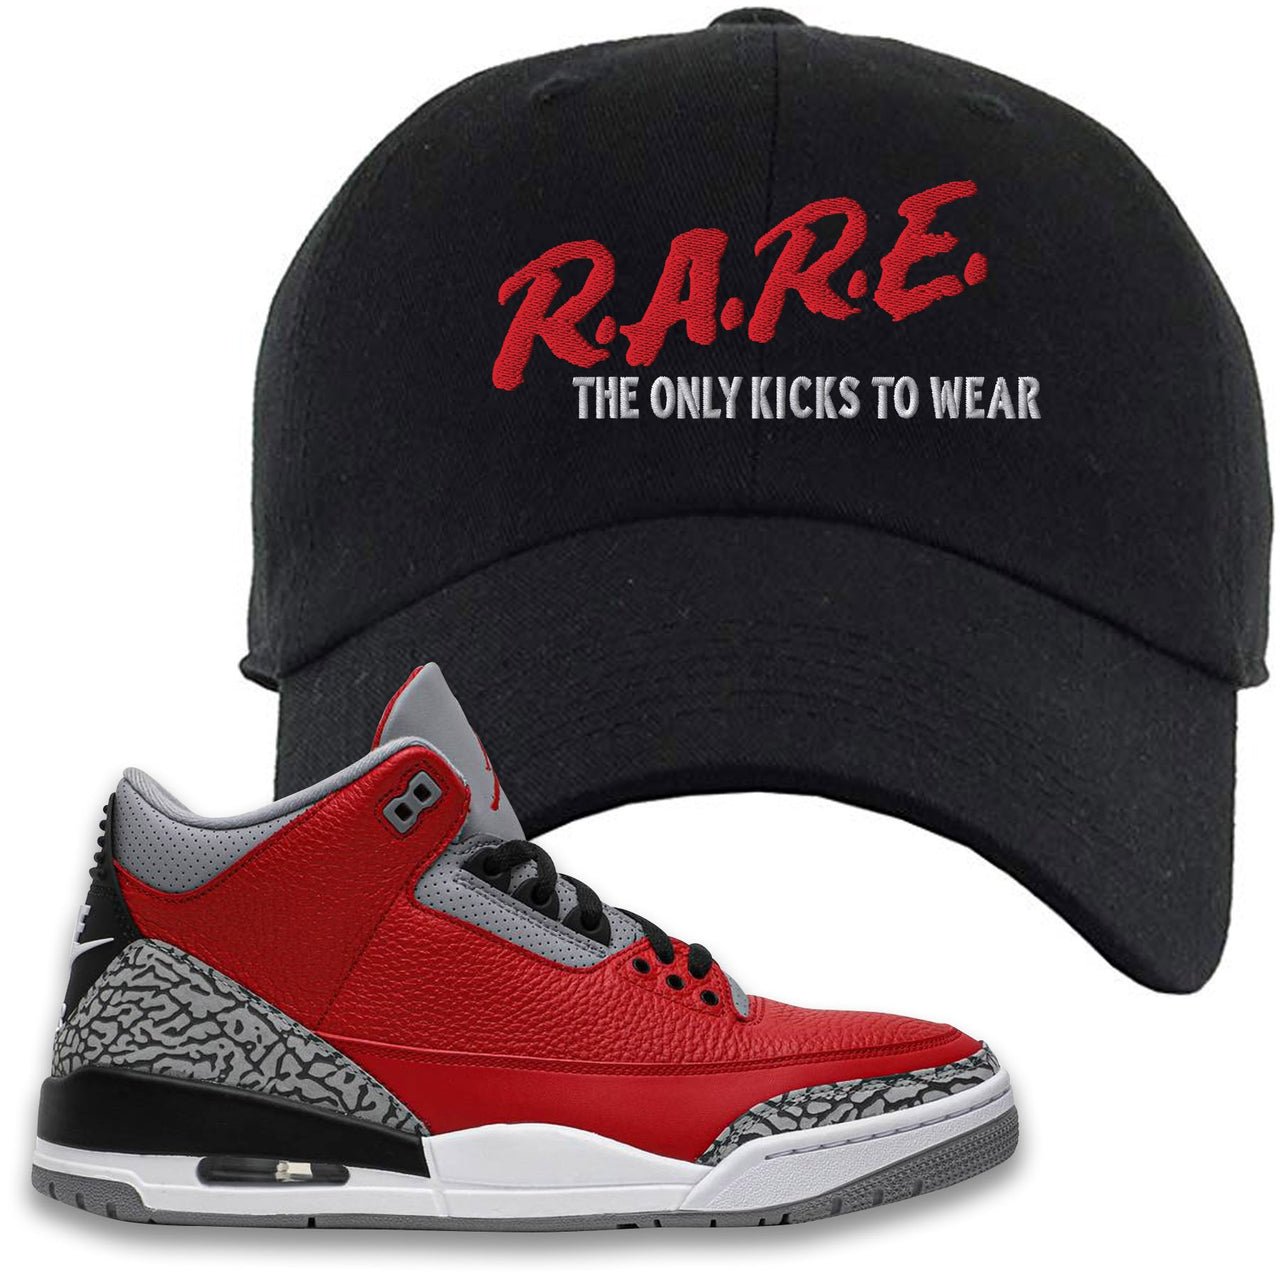 Chicago Exclusive Jordan 3 Red Cement Sneaker Black Dad Hat | Hat to match Jordan 3 All Star Red Cement Shoes | Rare